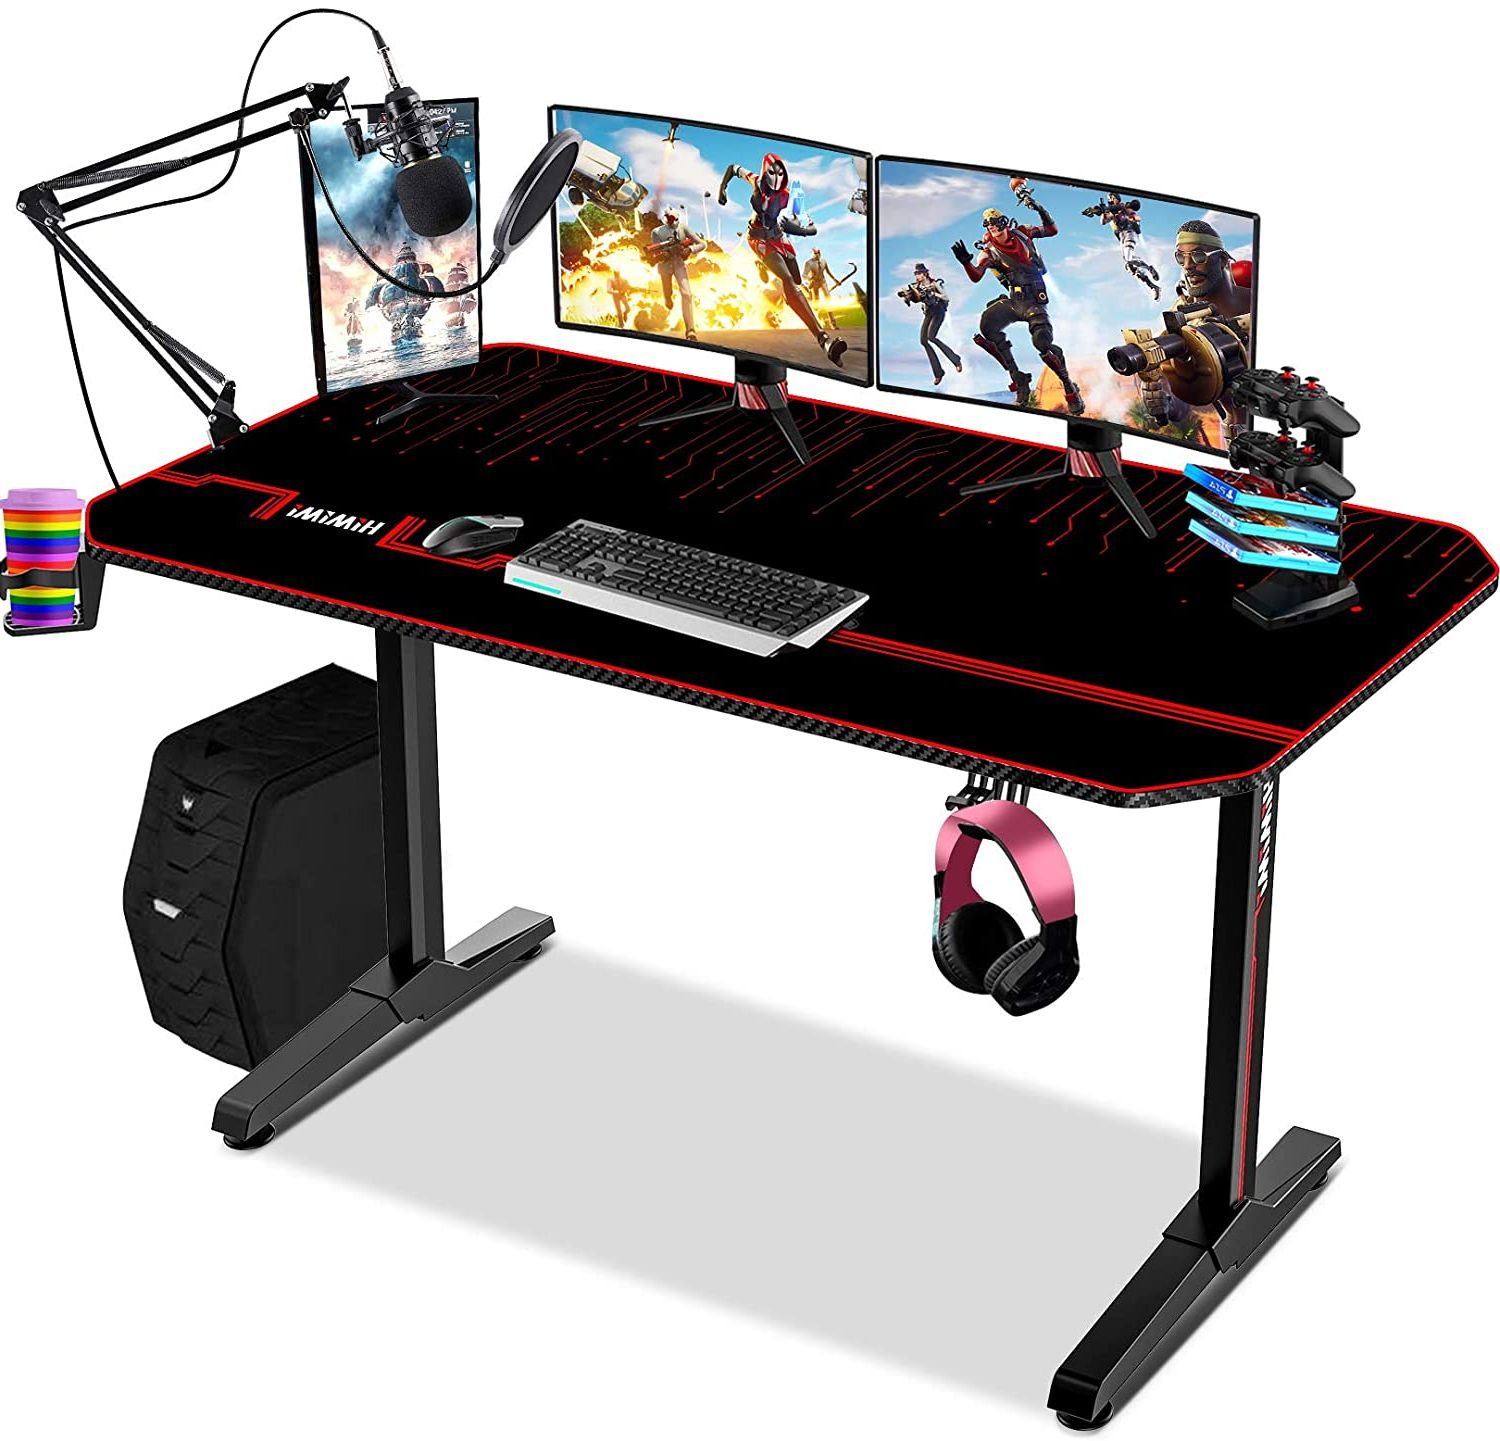 Buy Ergonomic Gaming Desk 55 Inch, T Shaped Computer Table With Free Pertaining To Current Gaming Desks With Built In Outlets (View 2 of 15)